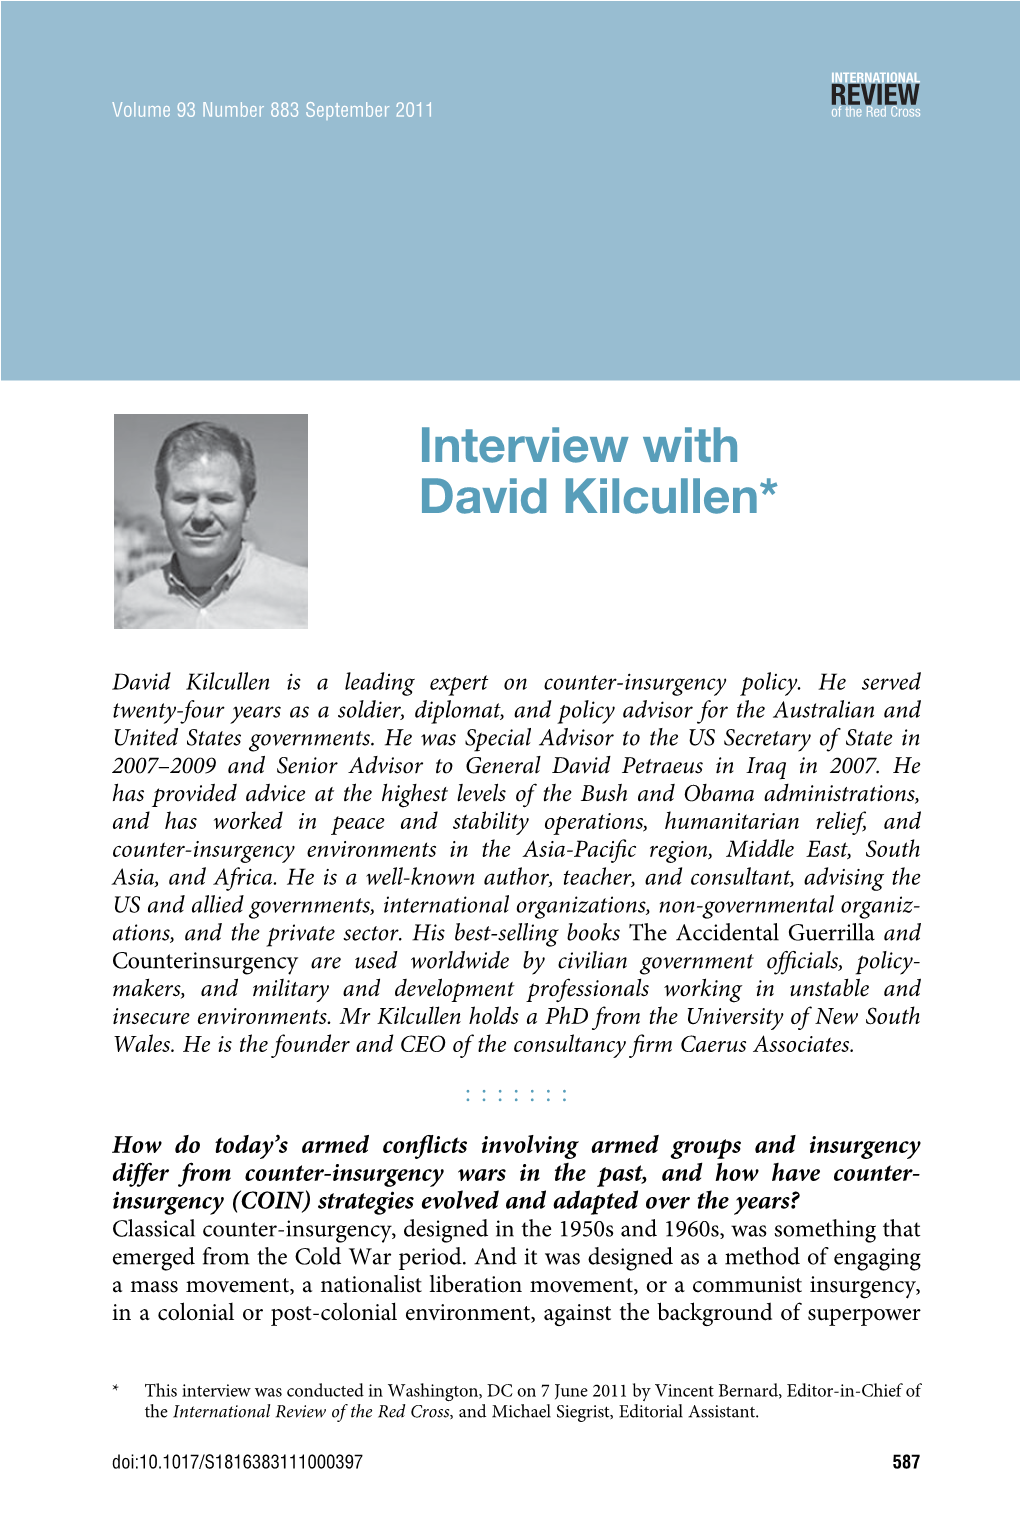 Interview with David Kilcullen*